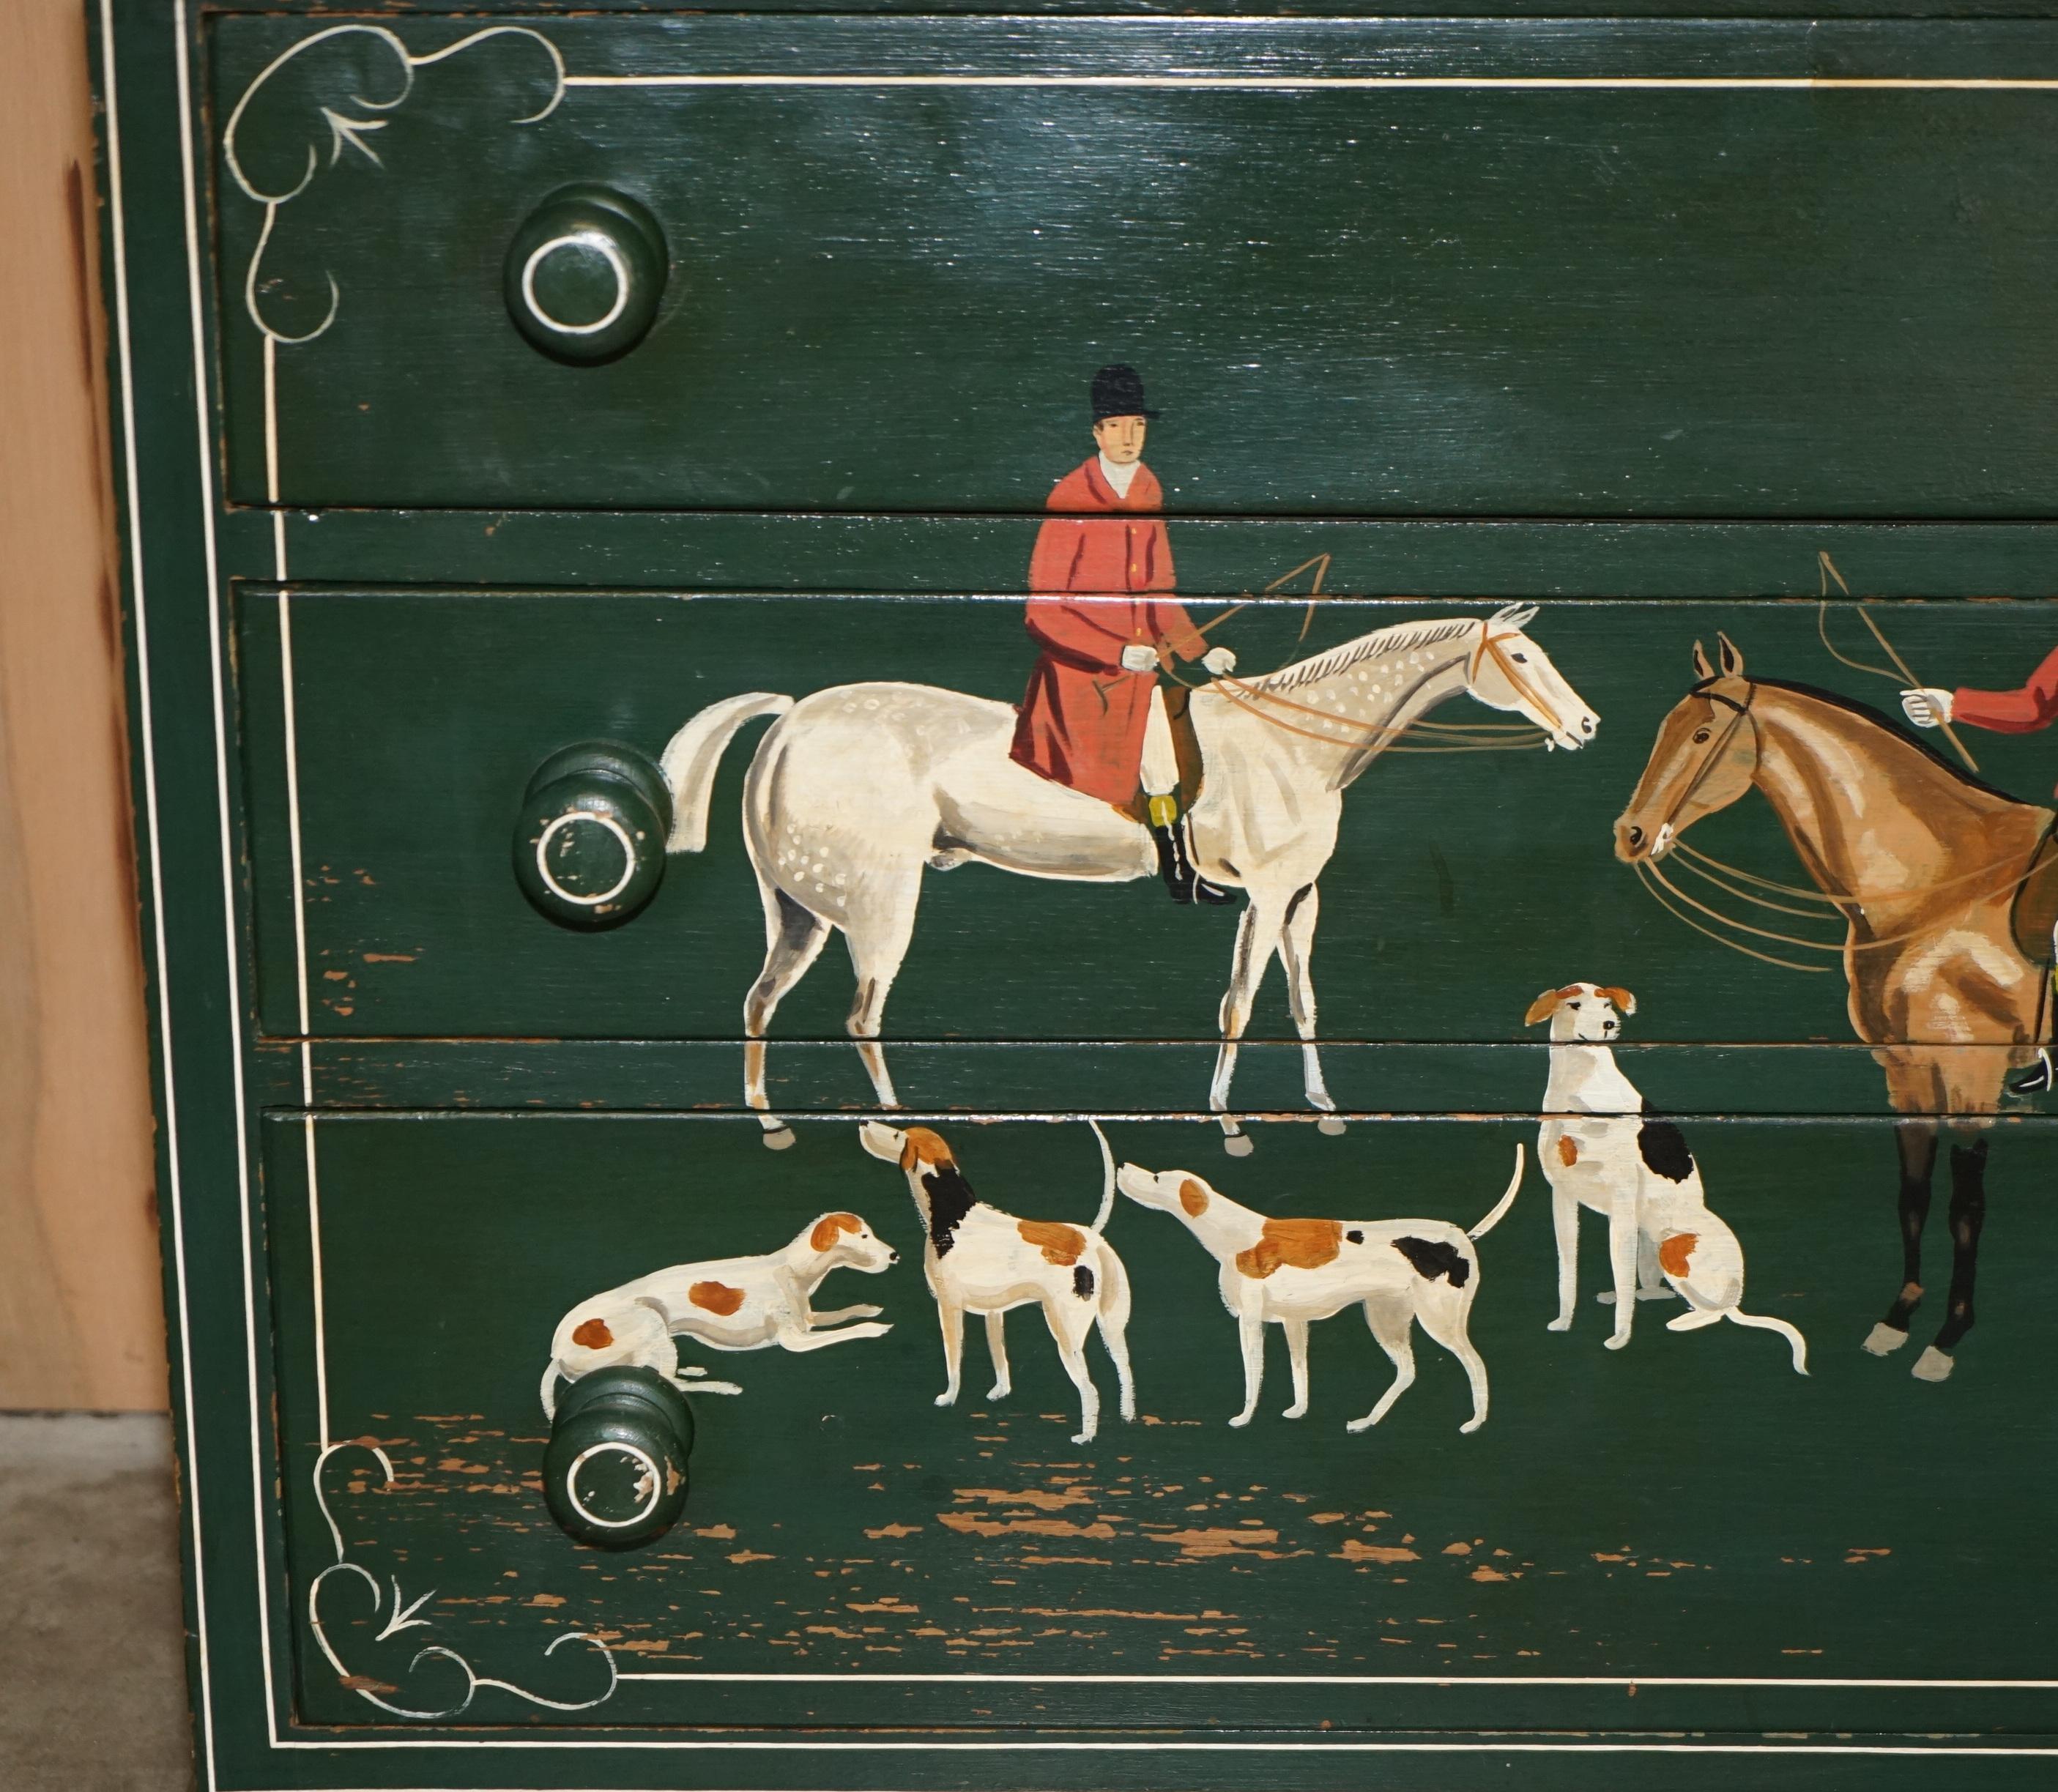 Anglais LOVELY ANTiQUE CHEST OF DRAWERS PAINTES EN GREEN DEPICTING HORSE & RIDER CIRCA 1900 en vente